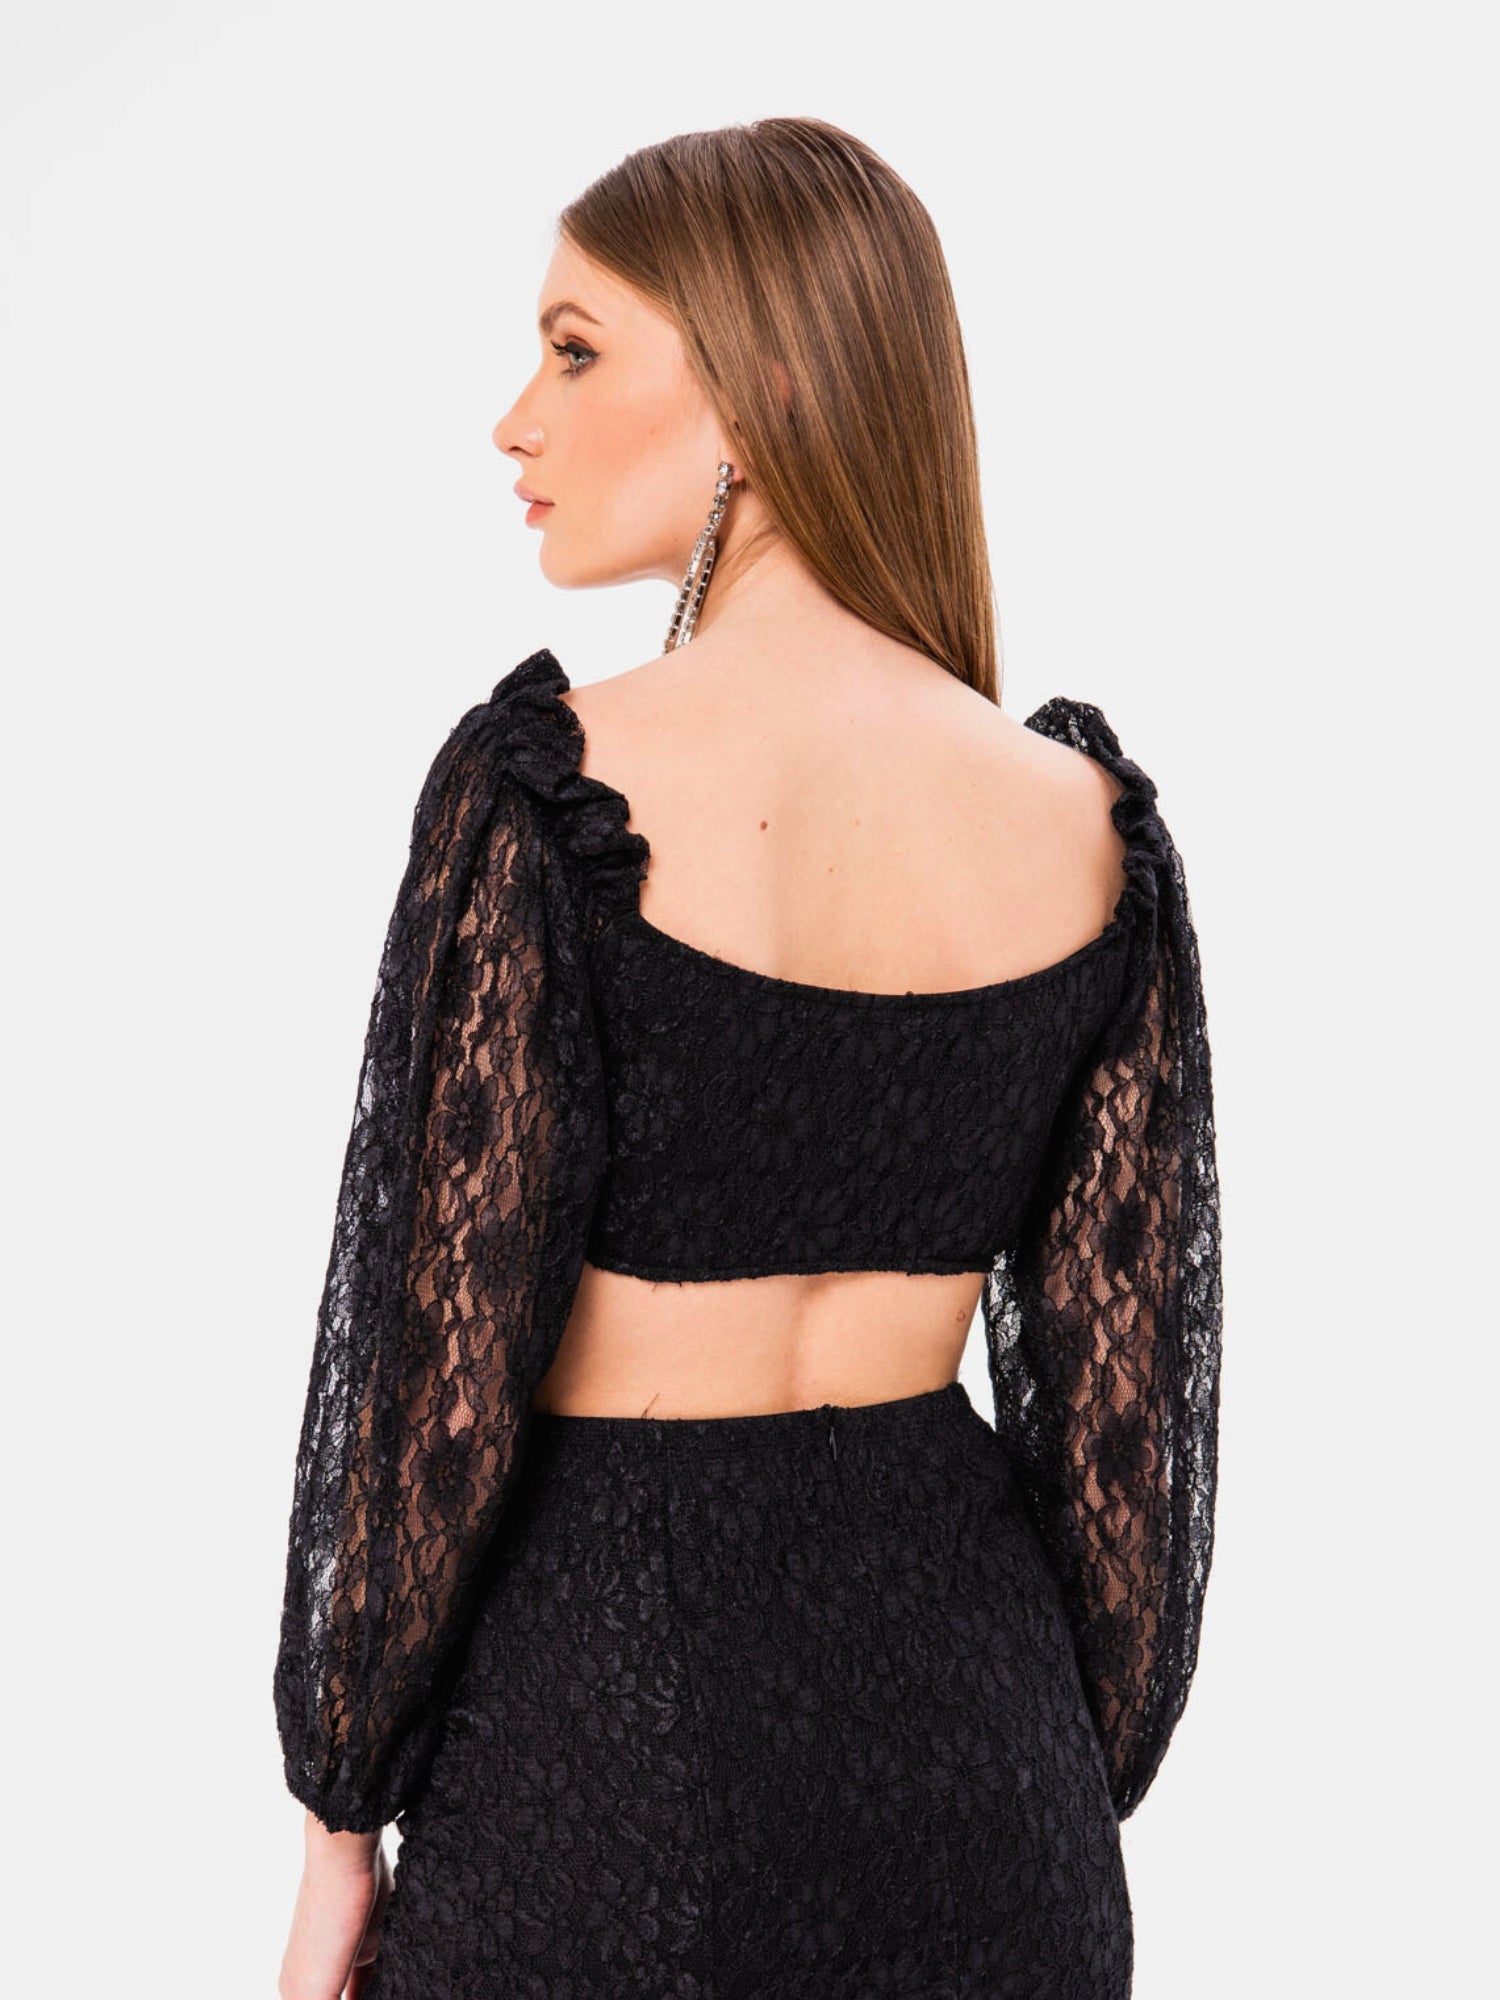 The Black Magic Lace Crop Top - The Black Magic Lace Crop Top will make a perfect addition to your wardrobe! This gorgeous top features a black lace design that will flatter any figure. The top features sheer lace long sleeves. - Ivory Sheep Collection Li